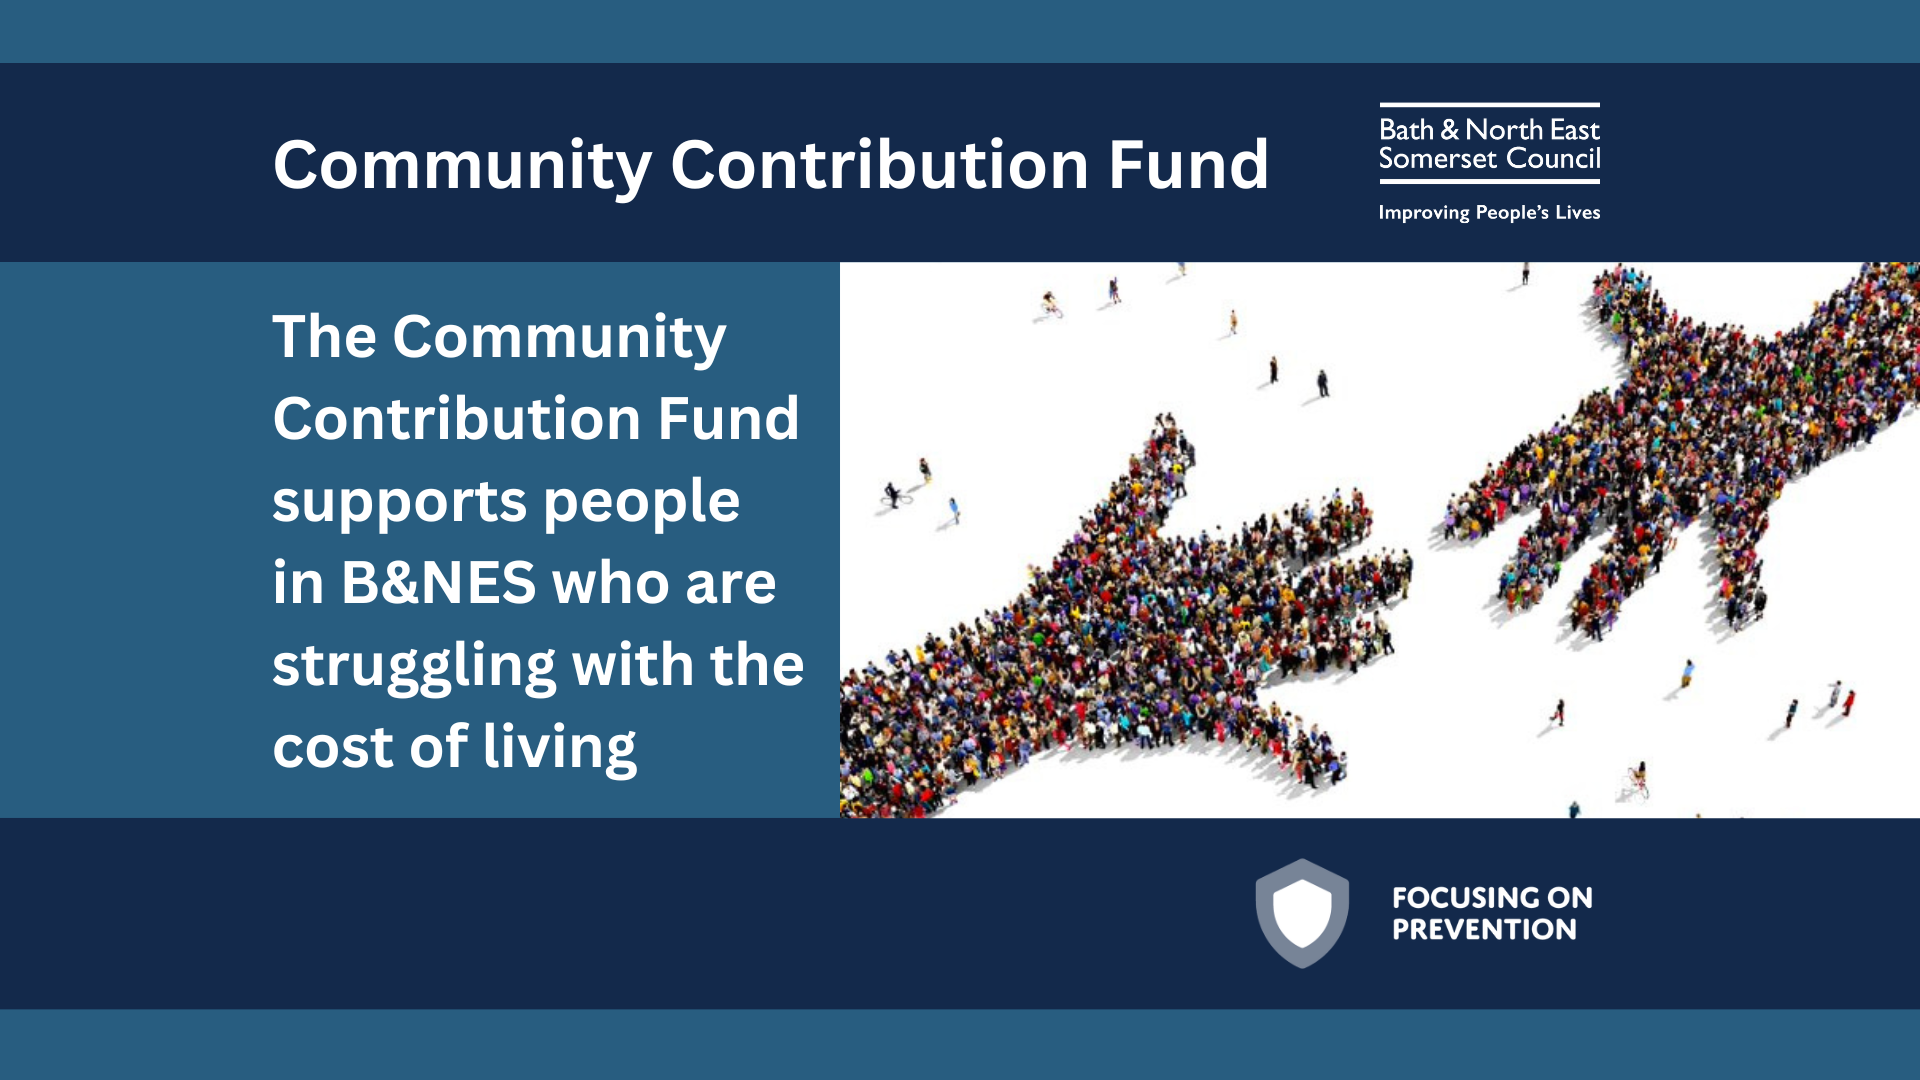 community contribution fund for B&NES